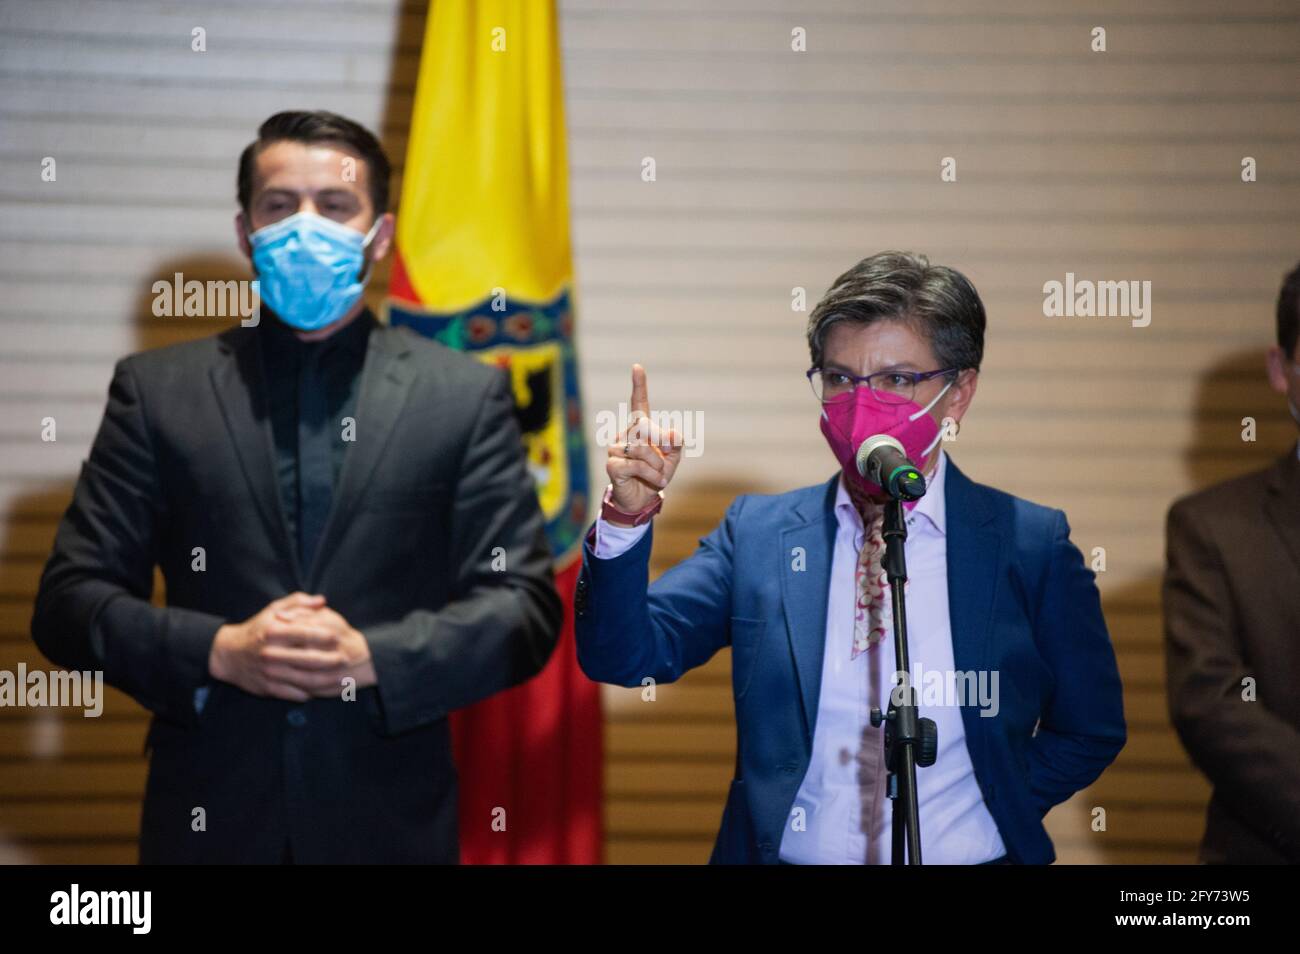 Mayor of Bogota, Claudia Lopez, Secretary of Health Alejandro Gomez and Nicolas Uribe, president of Bogota's Chamber of Comerce hold a live on television press conference announcing the COVID-19 measures that will be eased by june 8, 2021, in Bogota, Colombia on May 27, 2021. Stock Photo